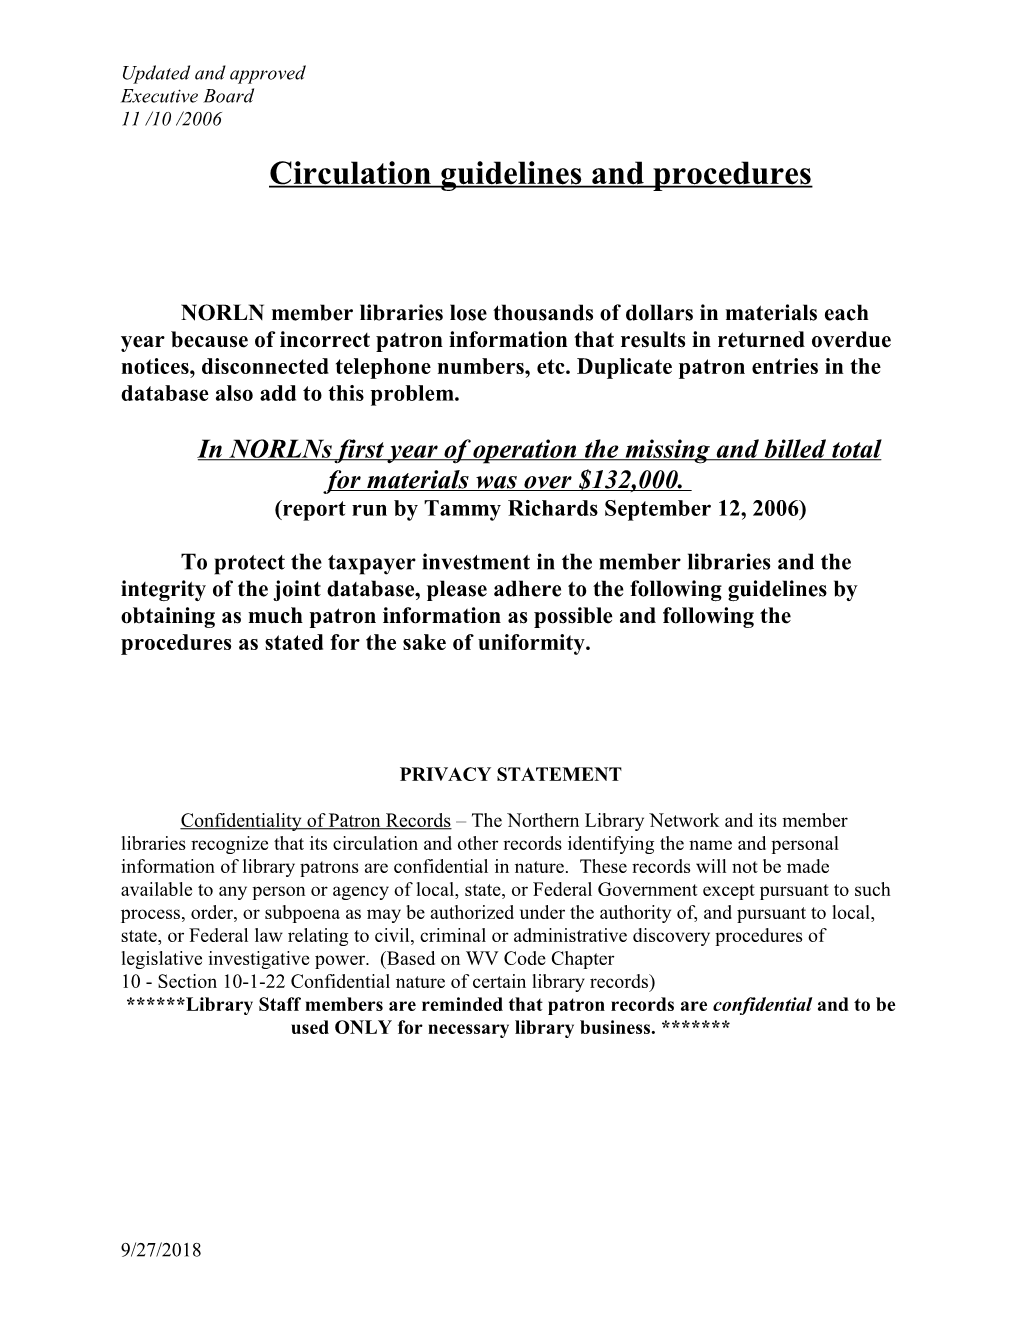 Circulation Guidelines and Procedures